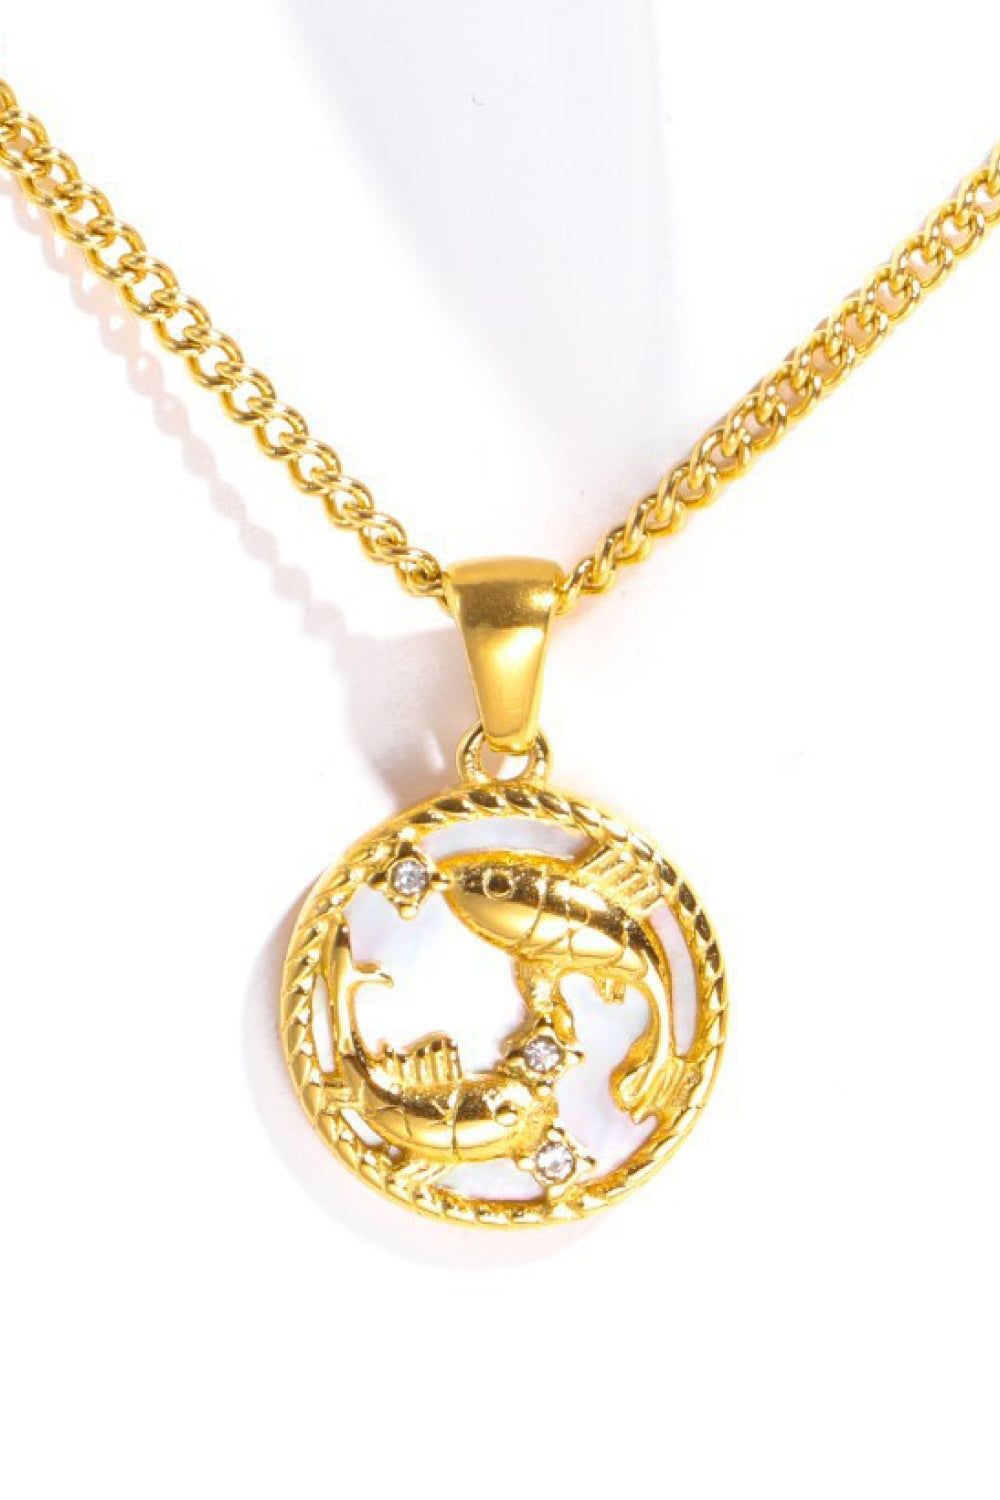 Goldenrod Constellation Pendant Stainless Steel Necklace Zodiac